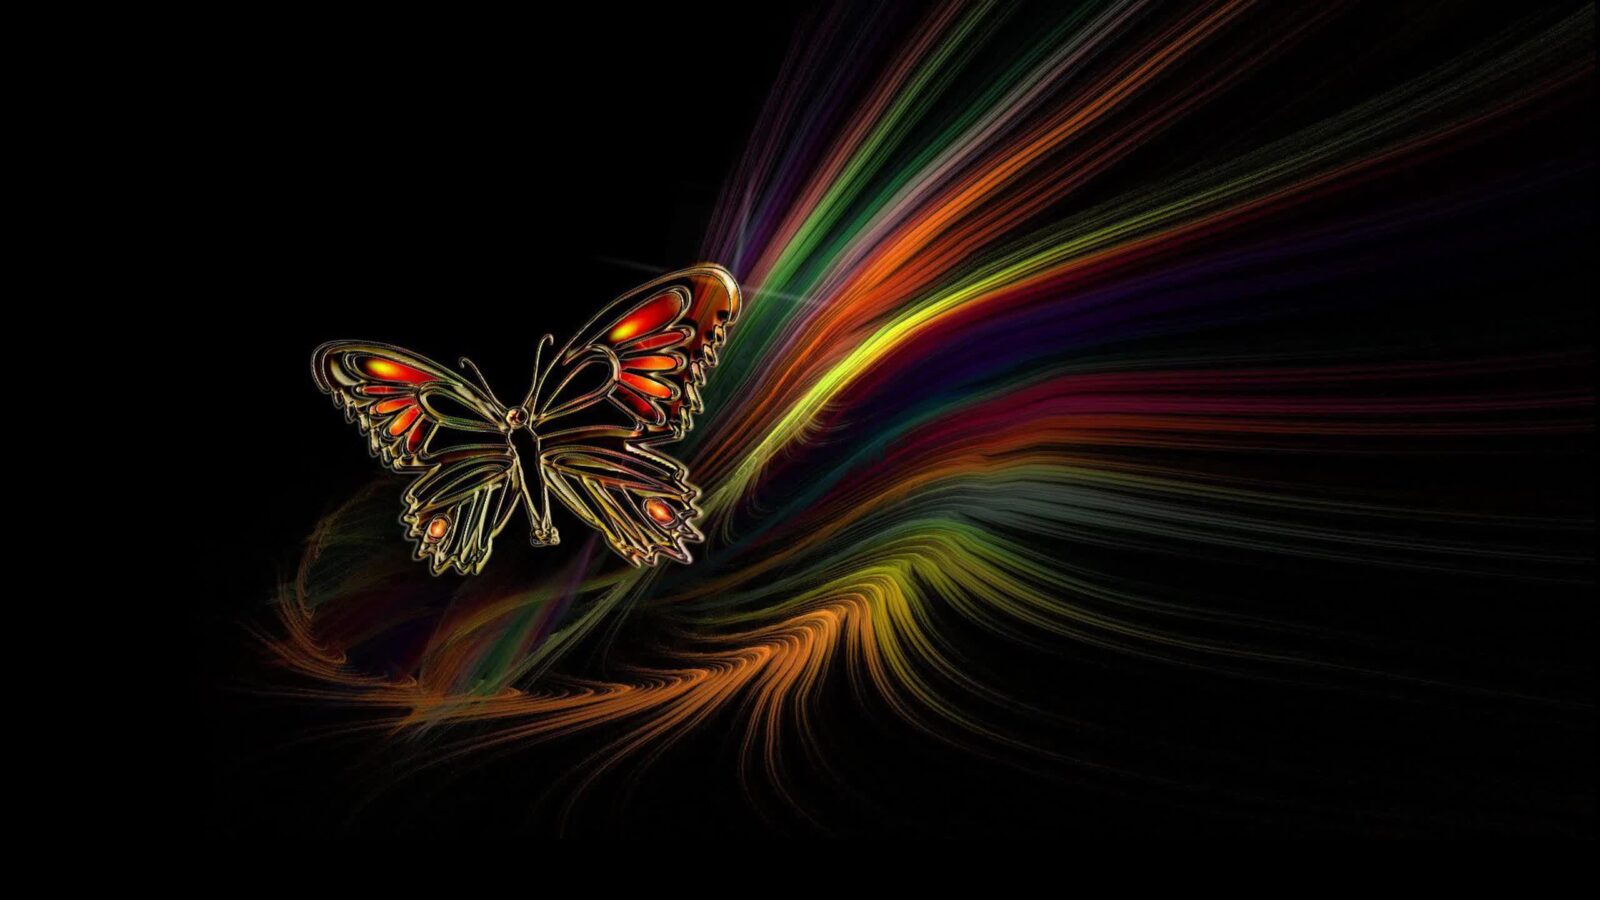 Colorful Butterfly Abstract 2K Artwork – Animated Desktop Wallpaper